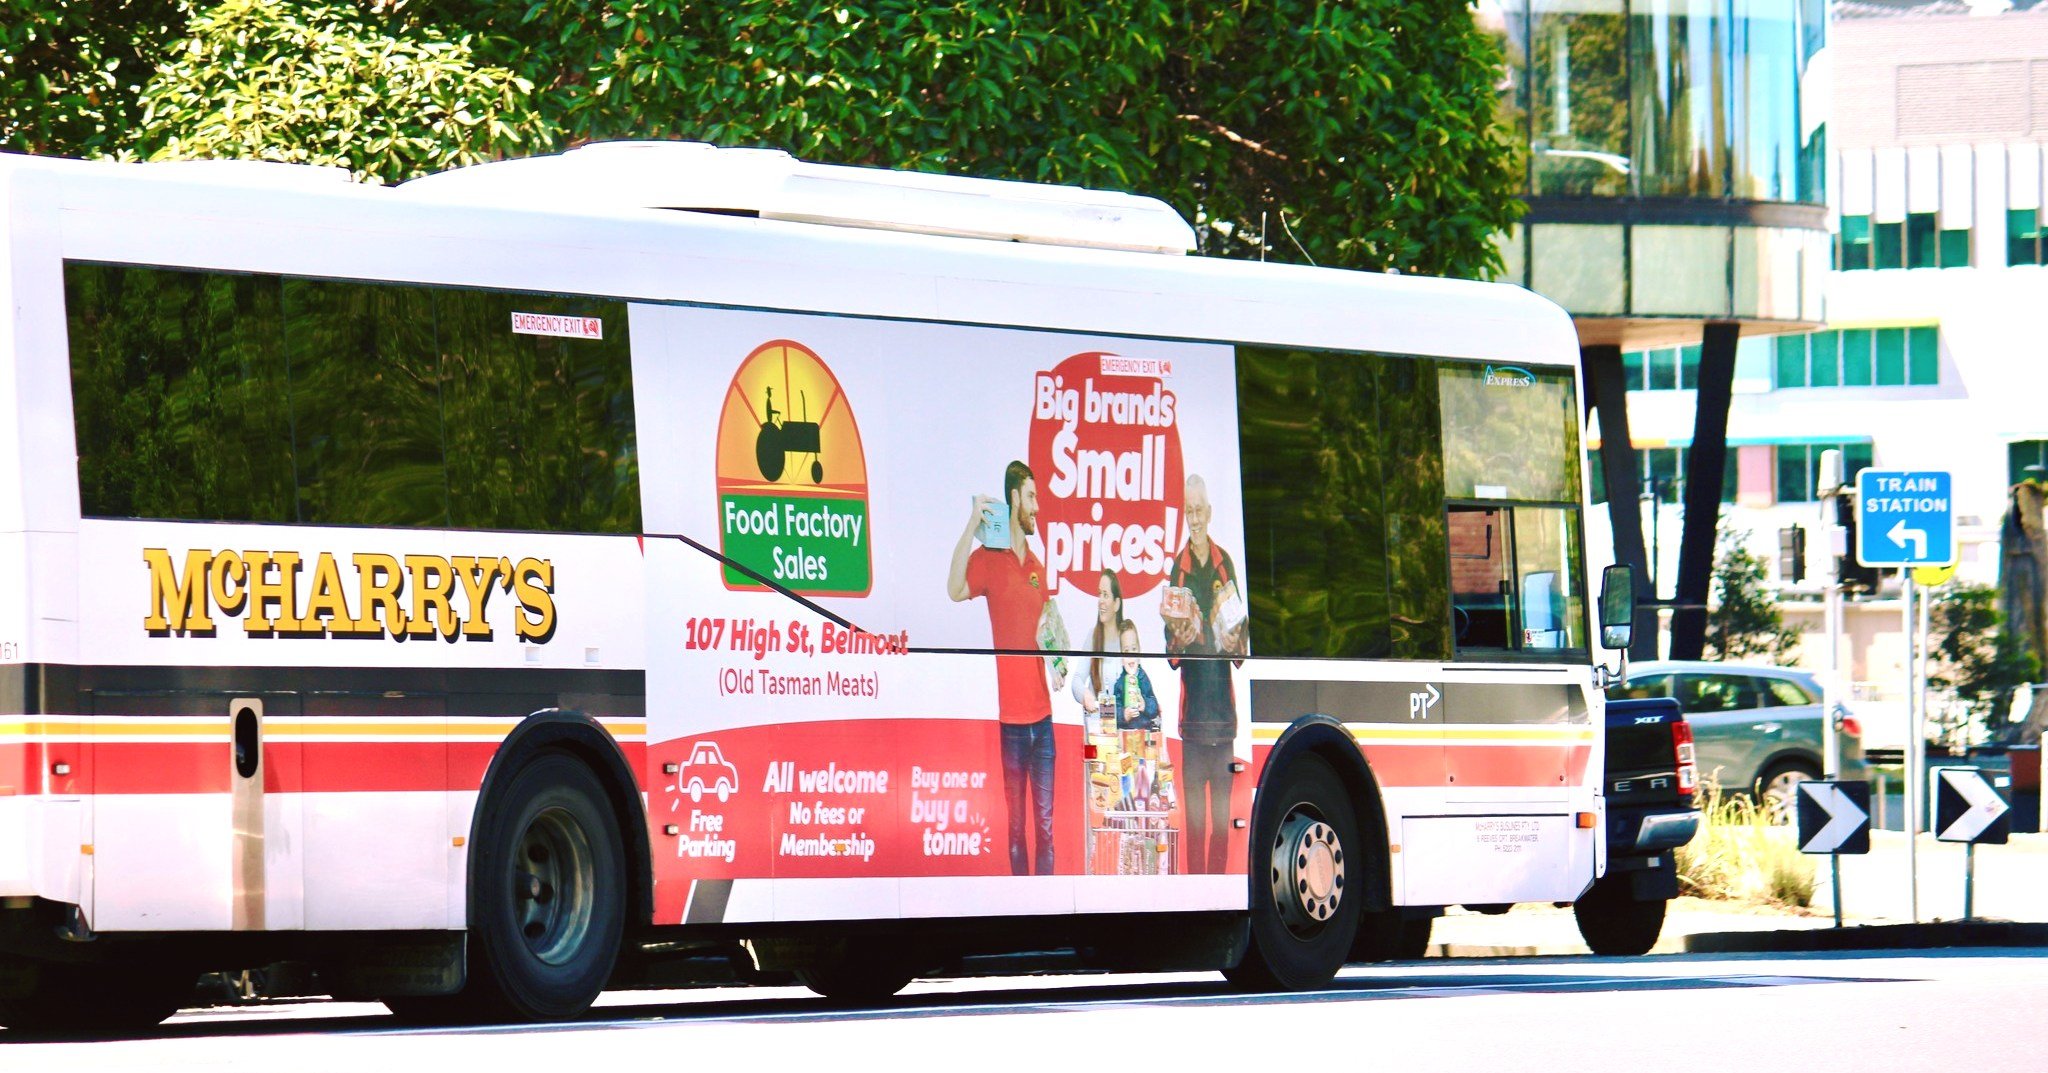 Drive your brand forward with our eye-catching bus maxi side ads! 🚌✨ Reach a wide audience on the move. Contact us today for unbeatable exposure! 

#BusAds #MarketingMagic #bigbusmedia #geelong #geelongadvertising #outdooradvertising